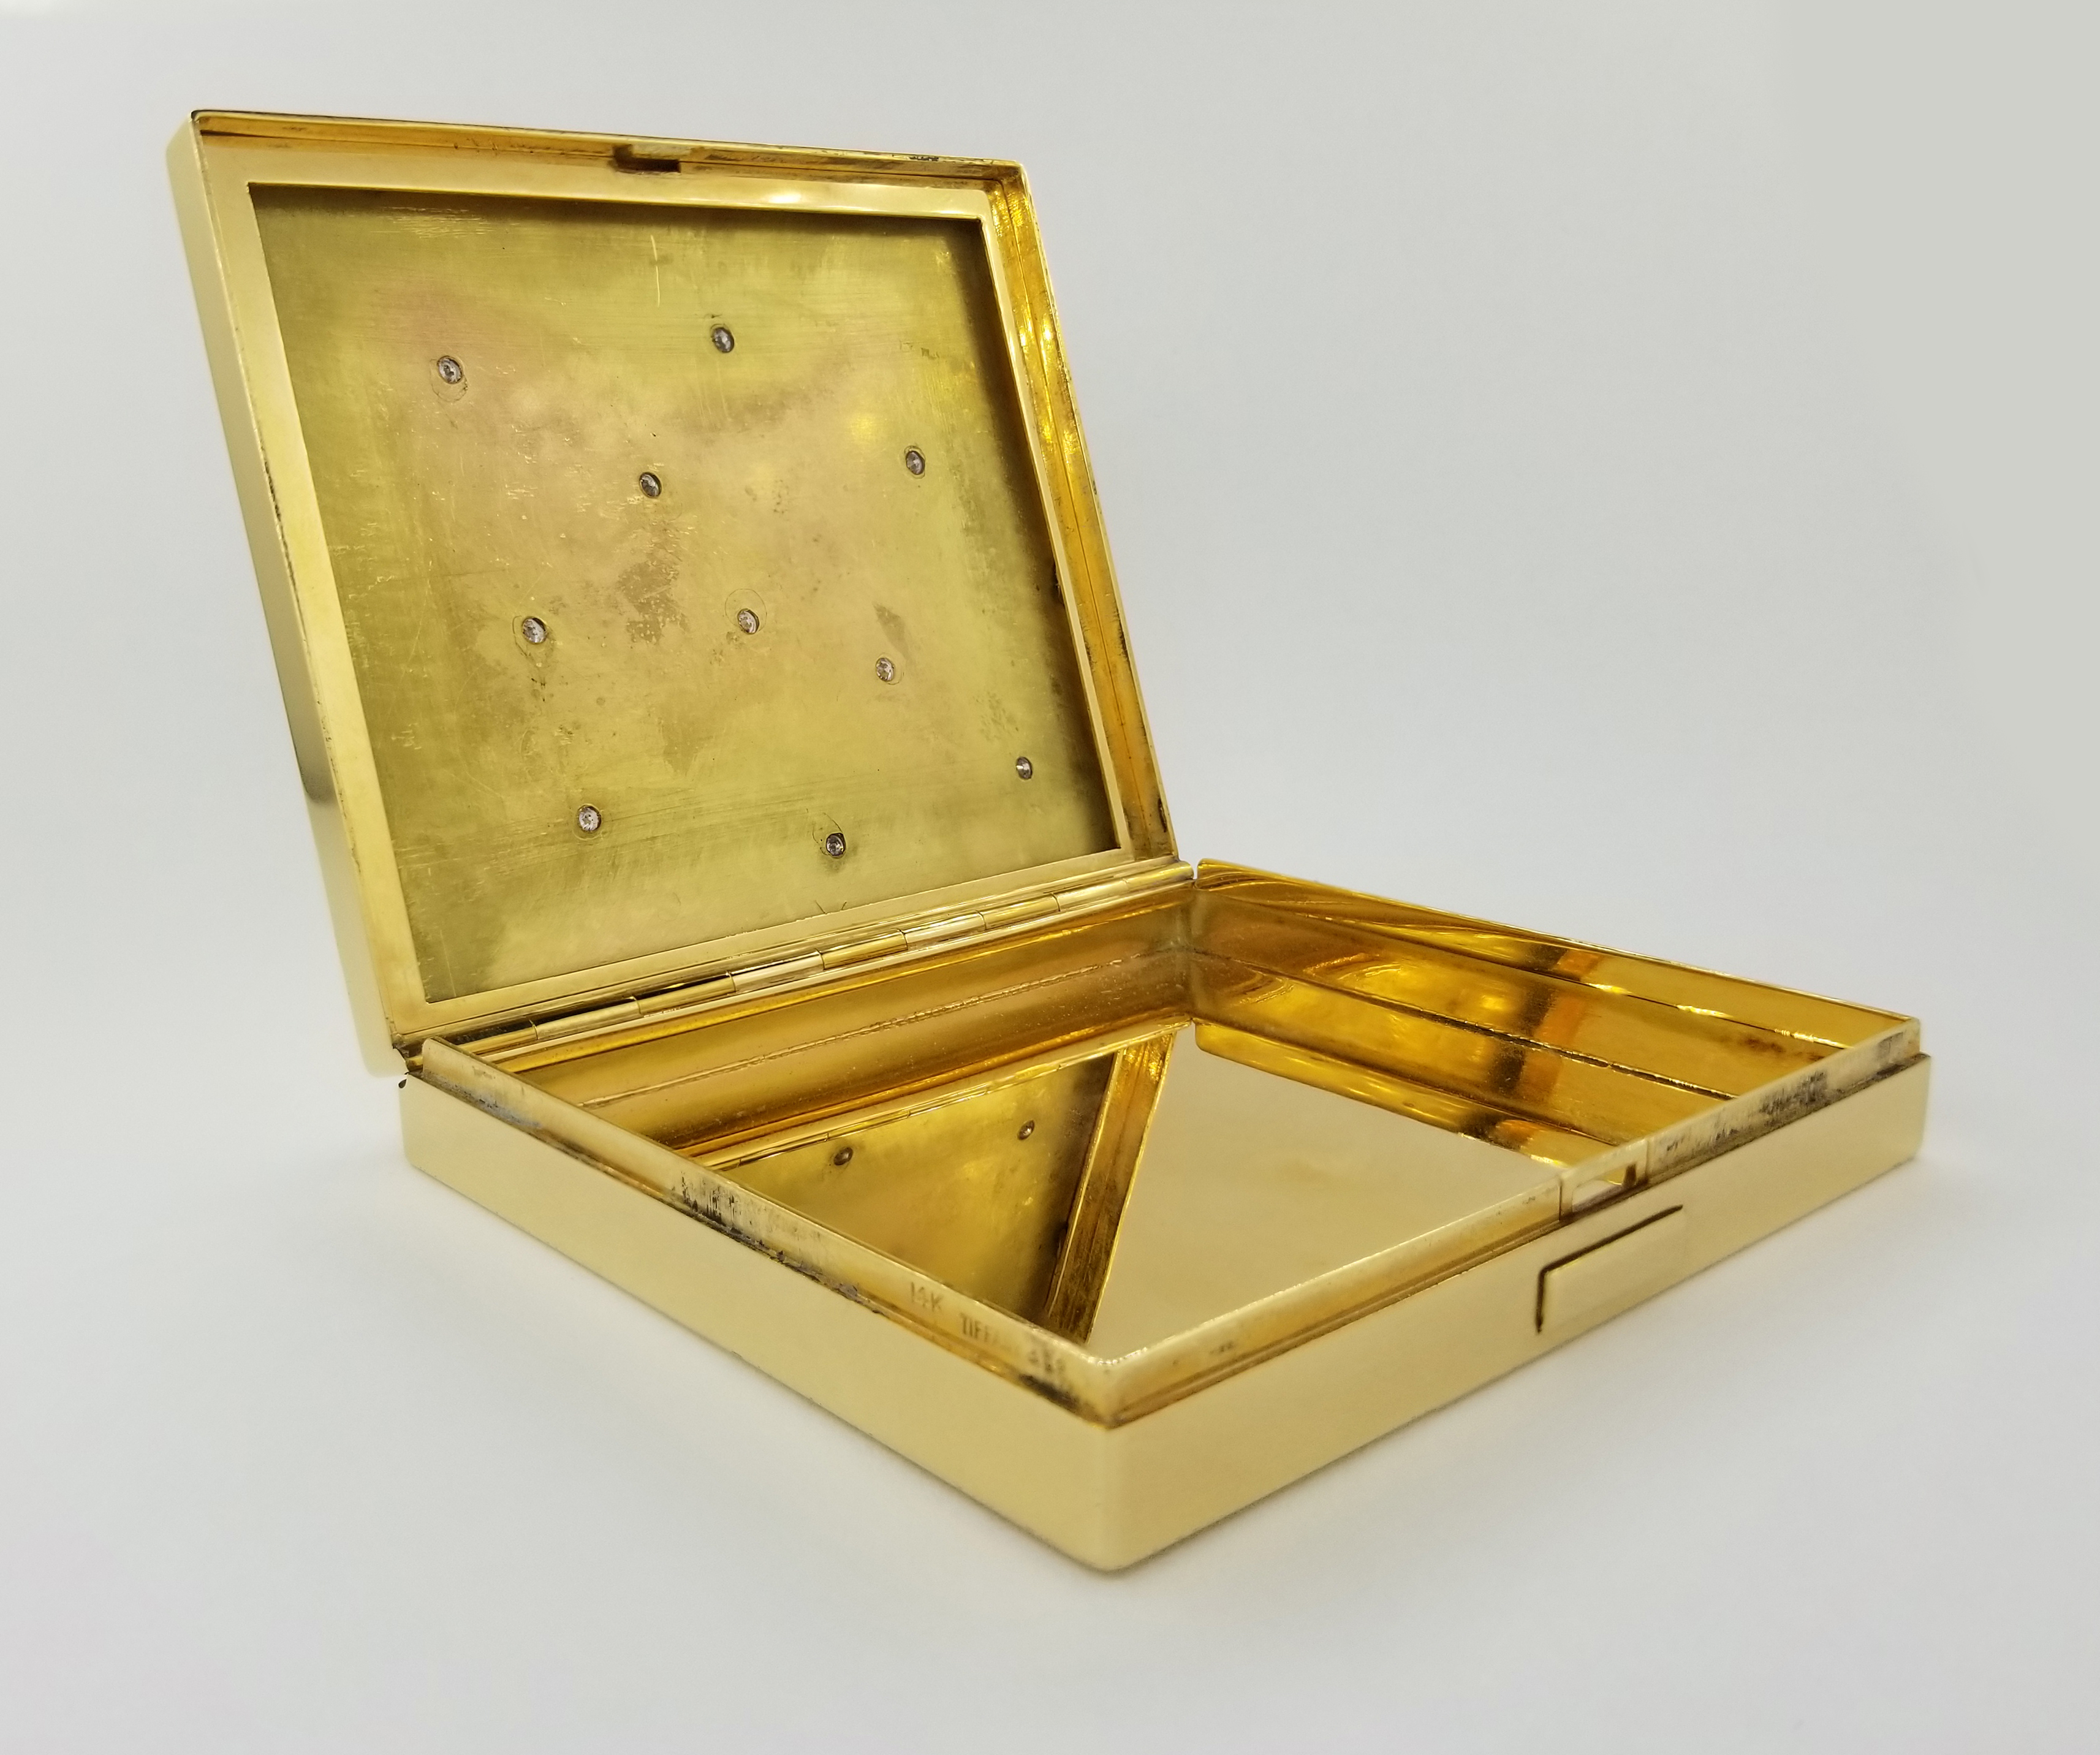 14K Gold Tiffany & Co. Diamond Floral Case - Image 3 of 7